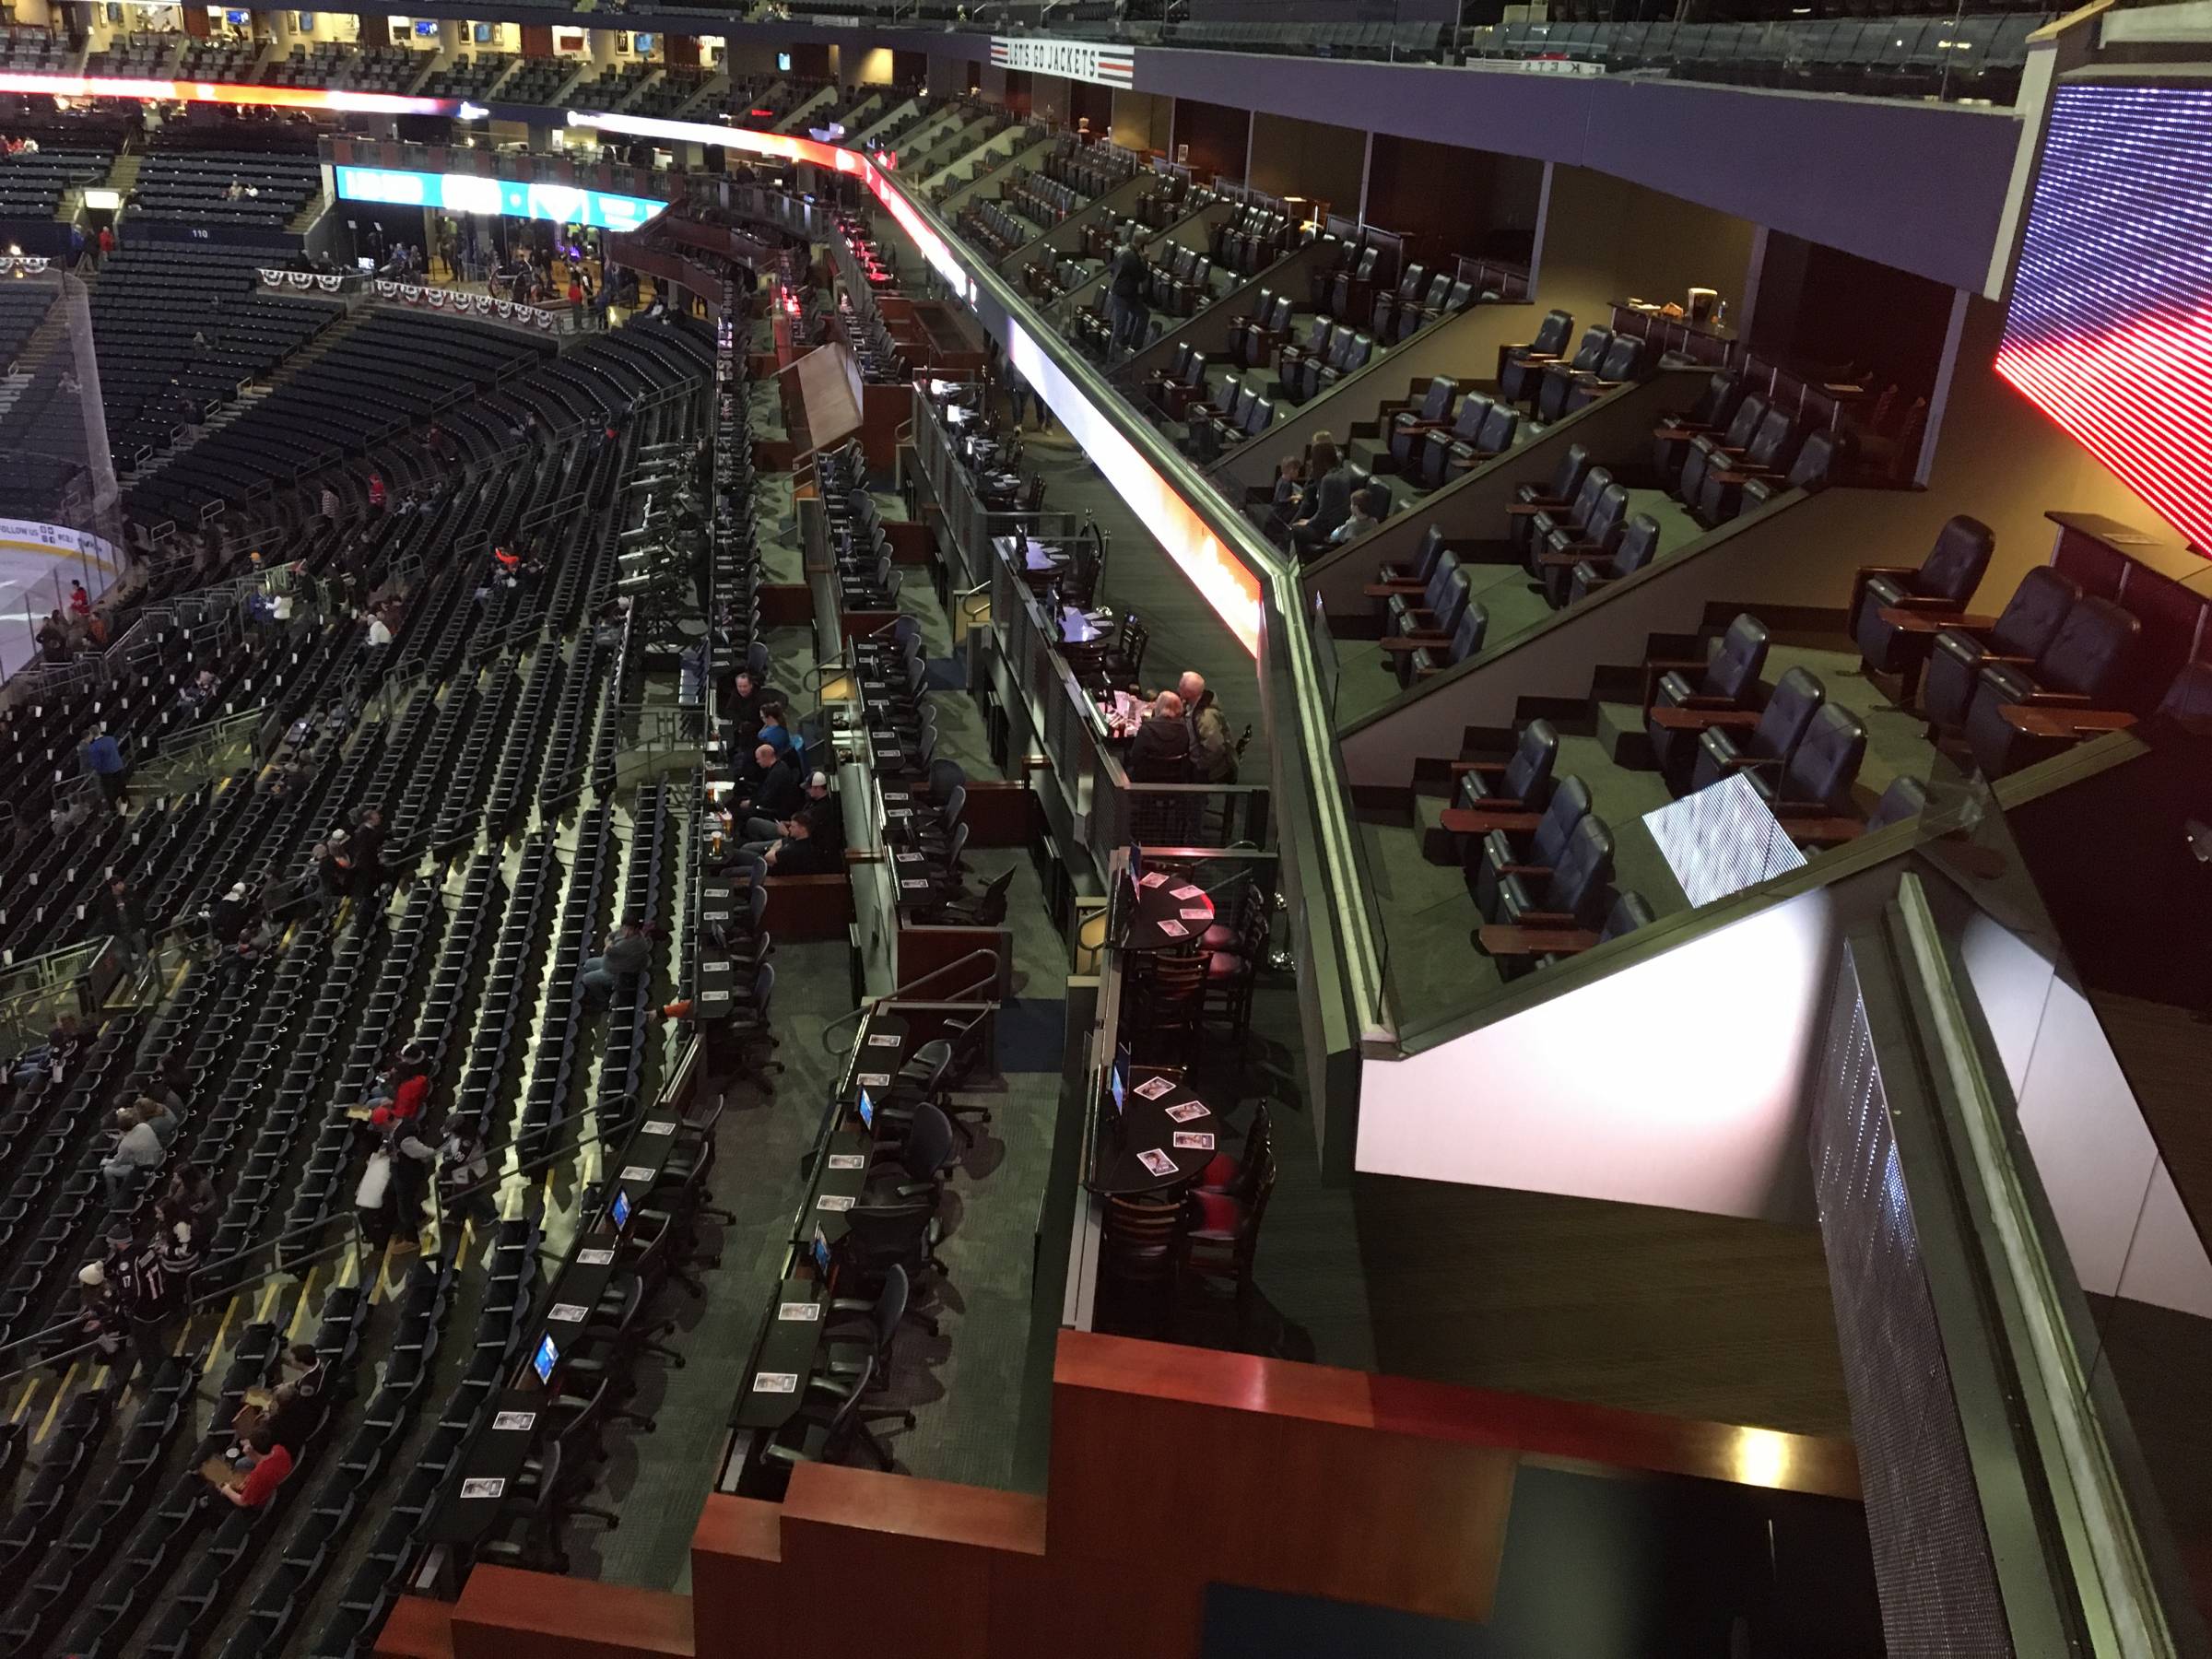 Terrace Tables and Founders Suites at Nationwide Arena